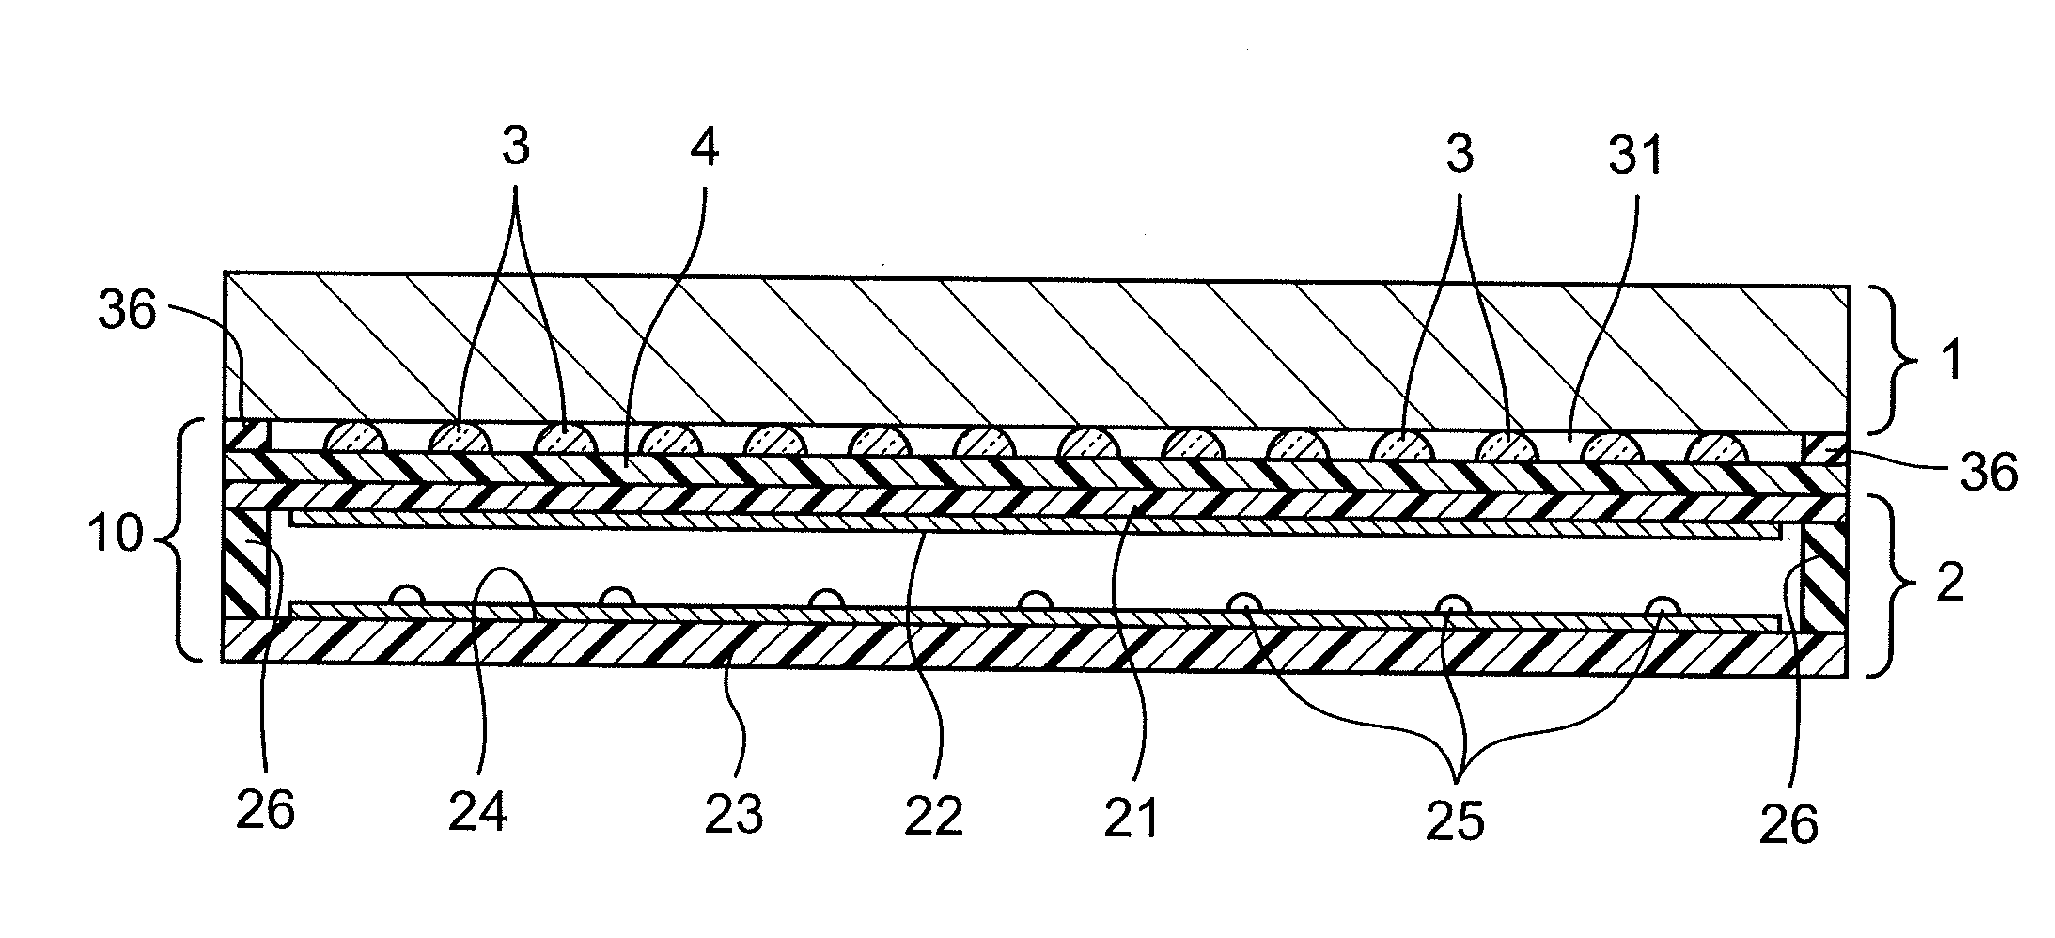 Installation structure of thin-type display and resistive film type touch panel, resistive film type touch panel unit with front-surface protrusions, and thin-type display unit with back-surface protrusions